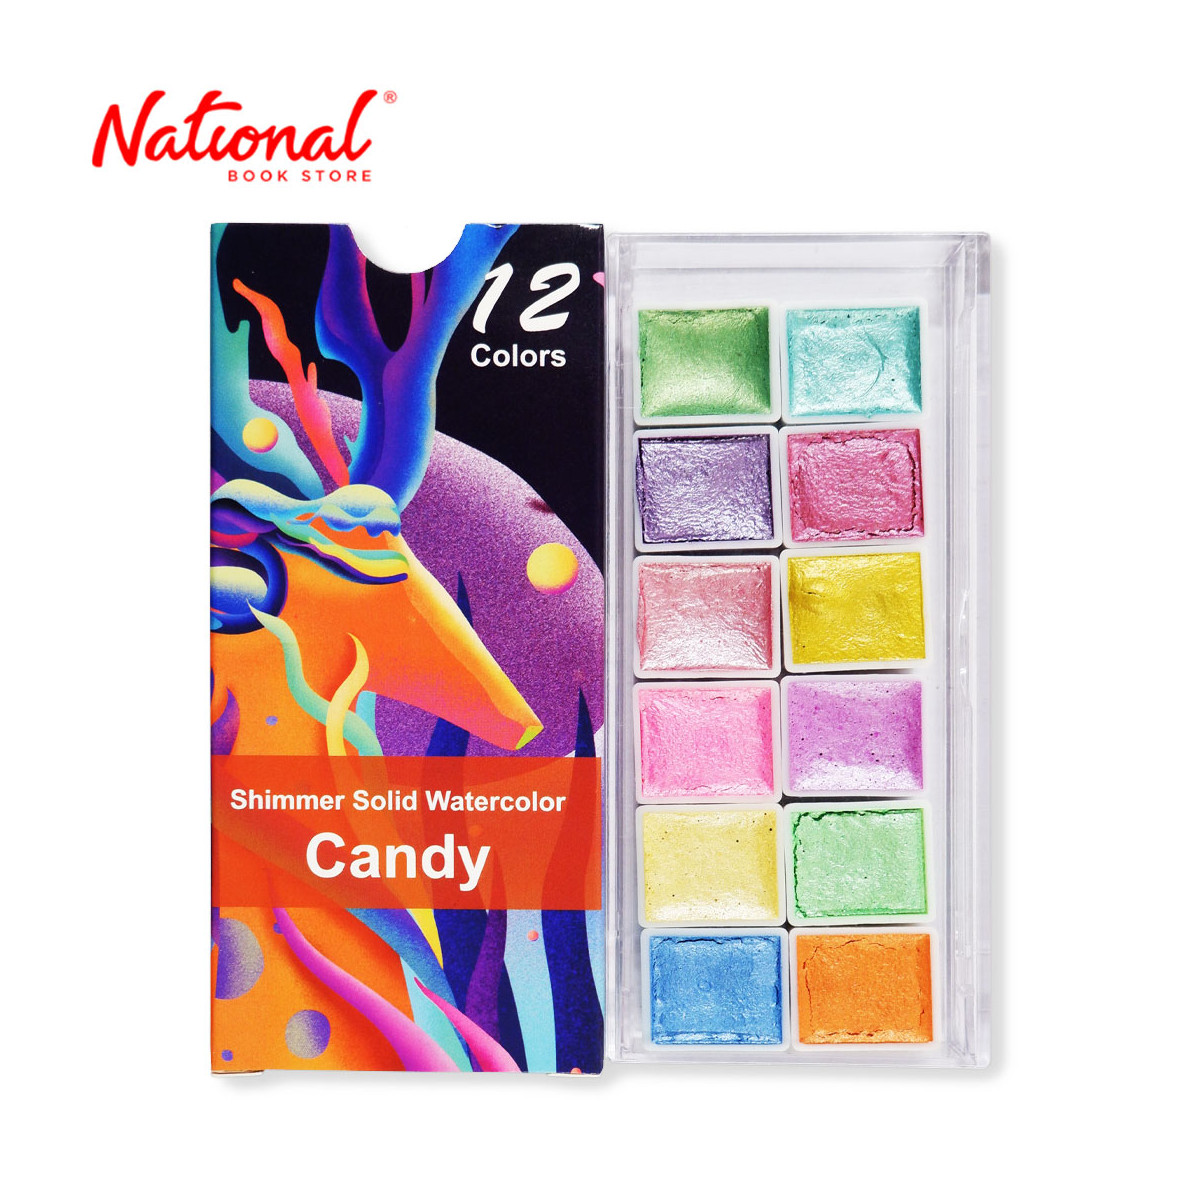 Seamiart Watercolor Pan Set NWLJSSC-12 Candy 12 Colors Portable - Arts & Crafts Supplies